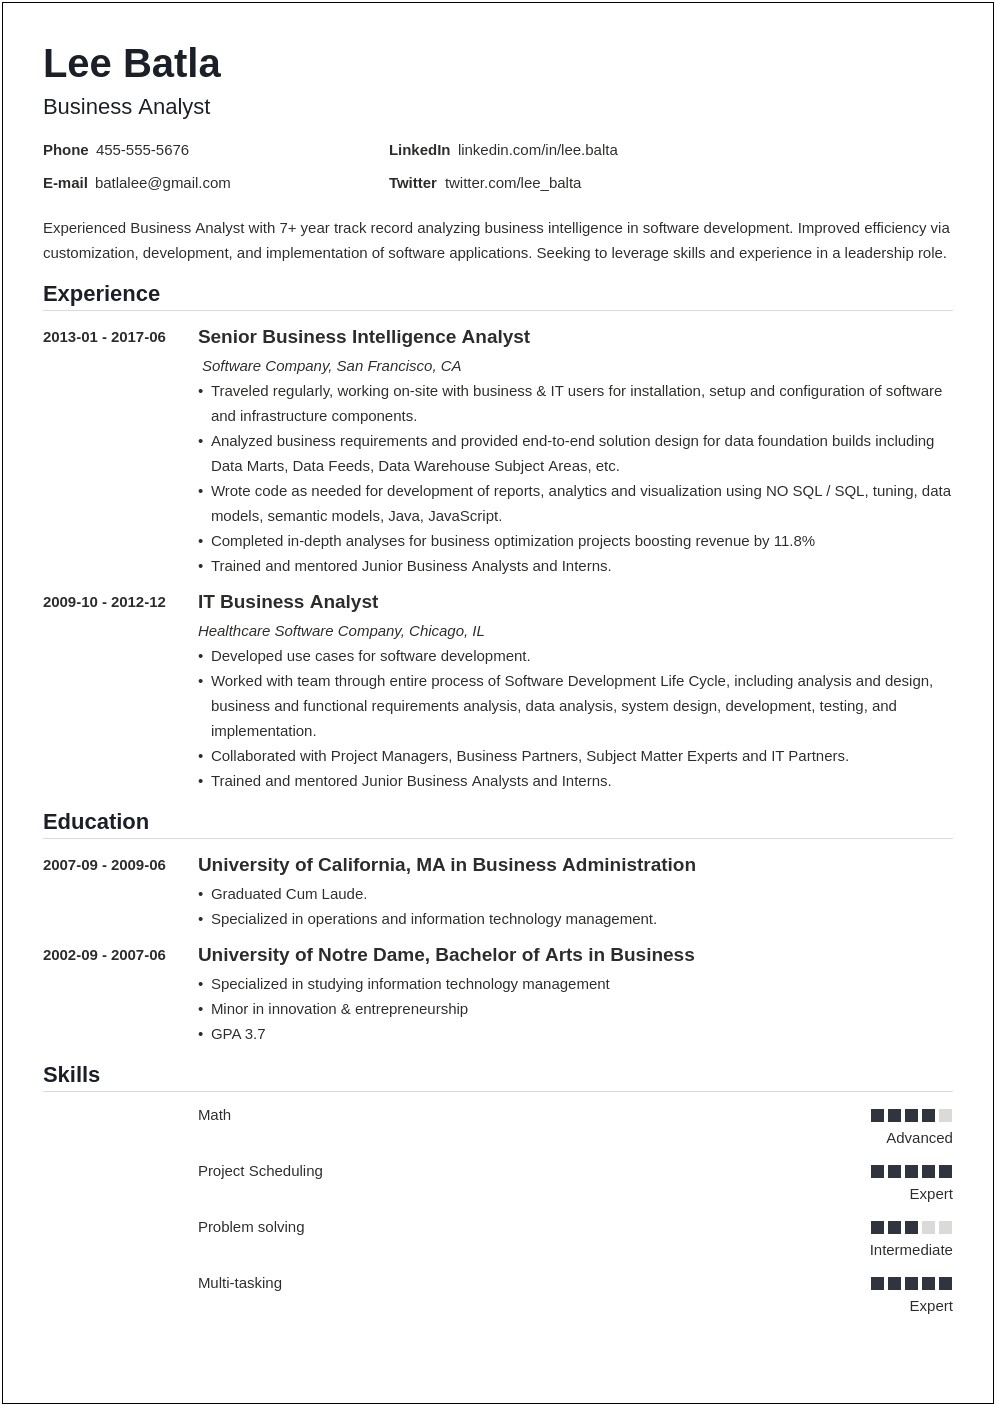 Business Analyst Product Manager Resume